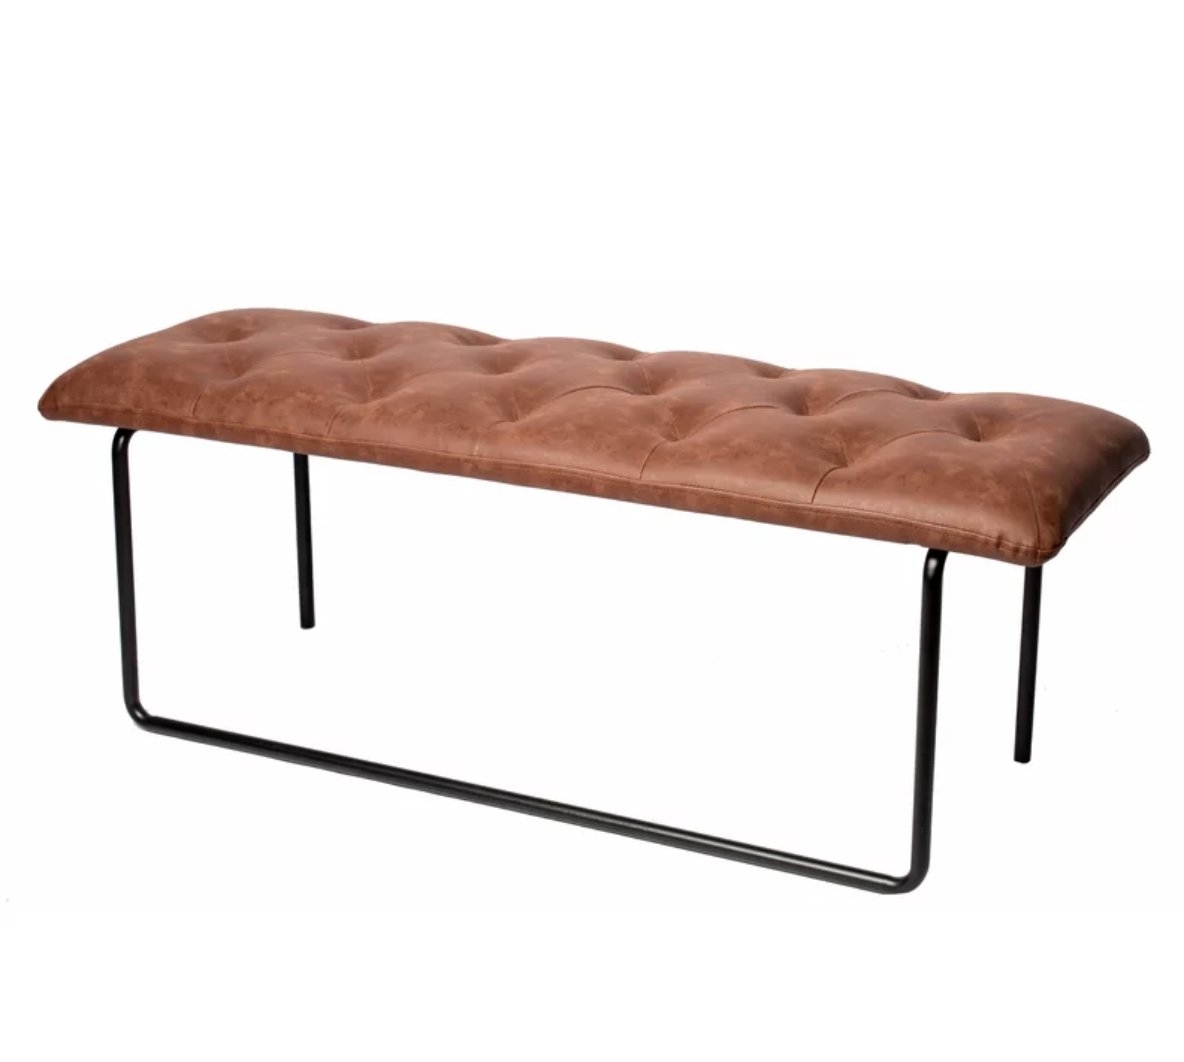 Molle Upholstered Bench - Image 1